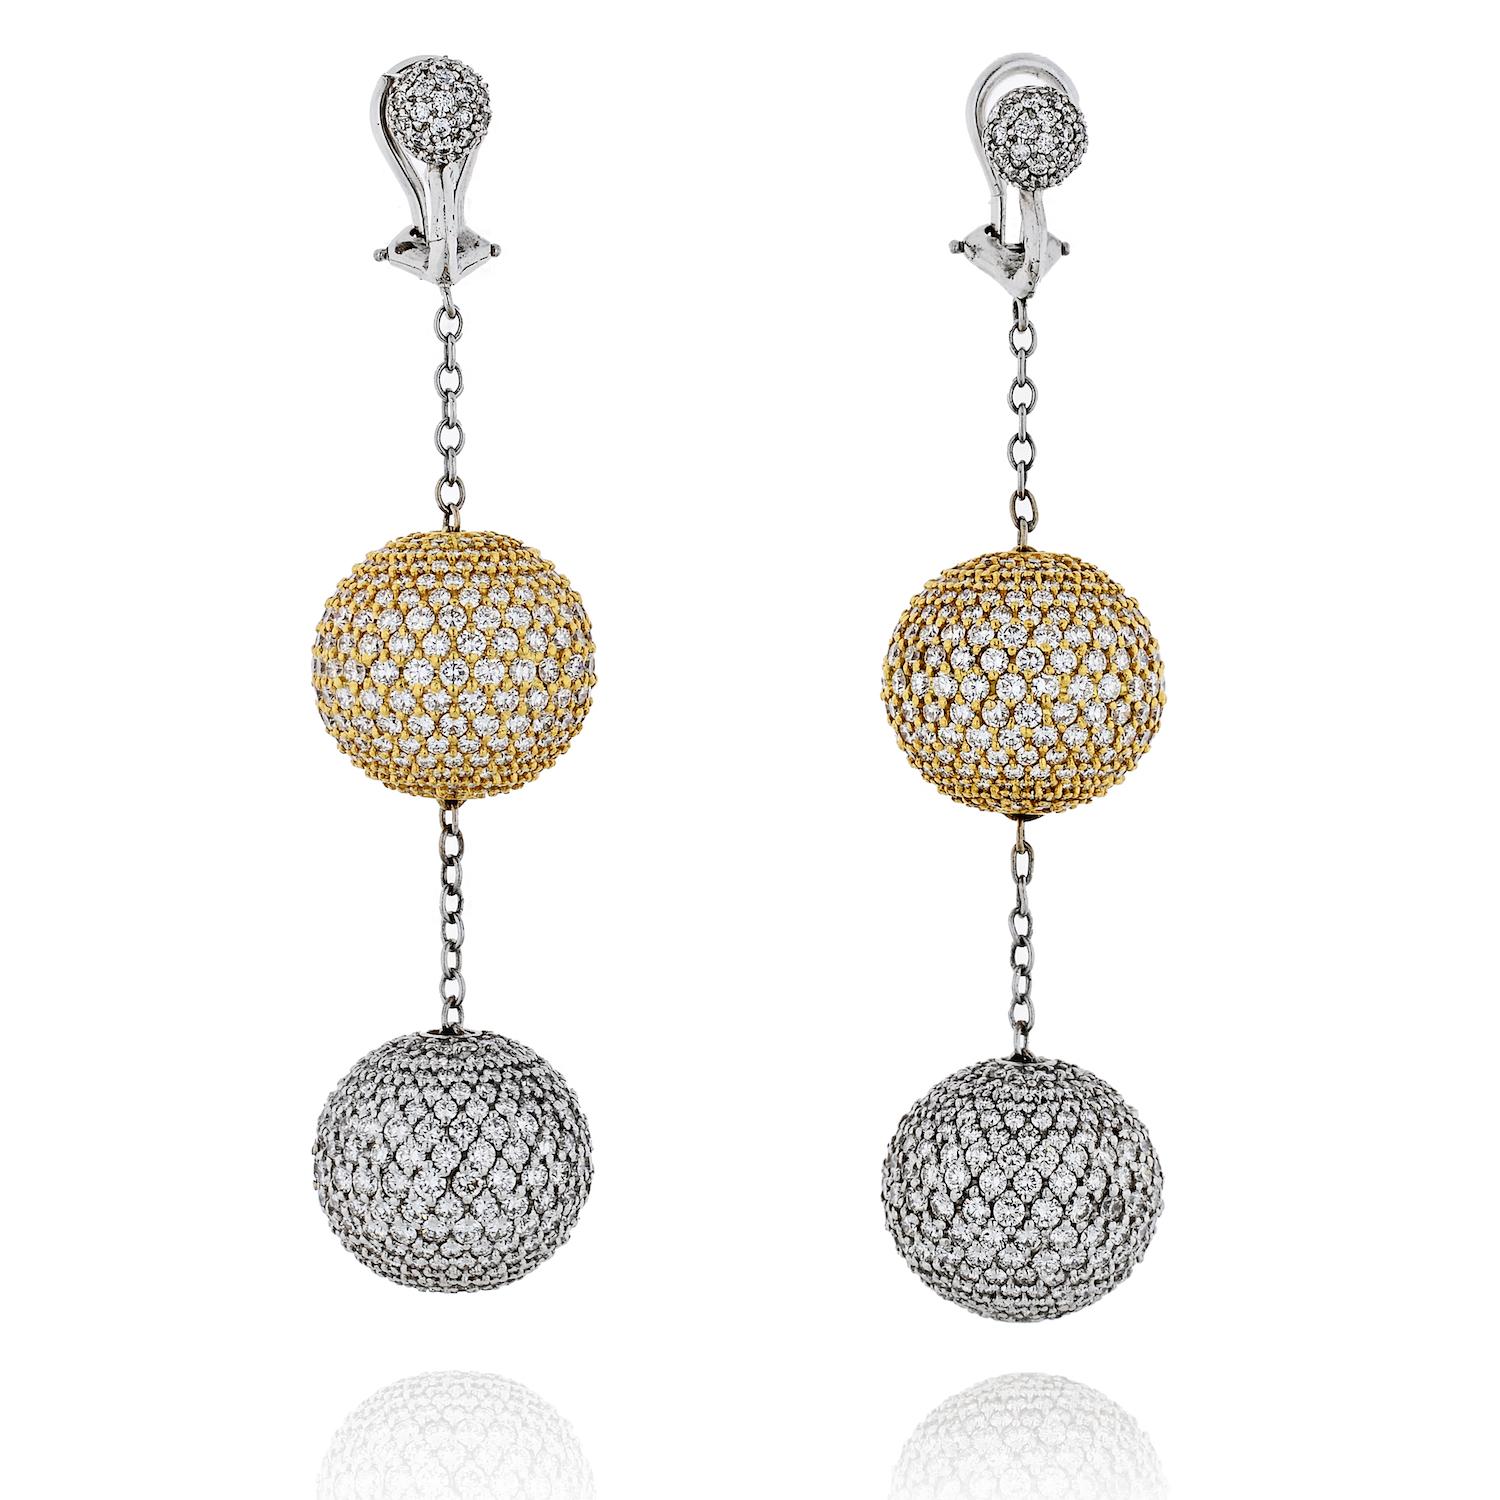 Pave diamond three tier disco ball earrings are an amazing addition to your fun diamond jewelry collection.

Material: 18k Gold
Grams: 45gr
Carat Weight: 20cts
Diamond Cut: Rounds